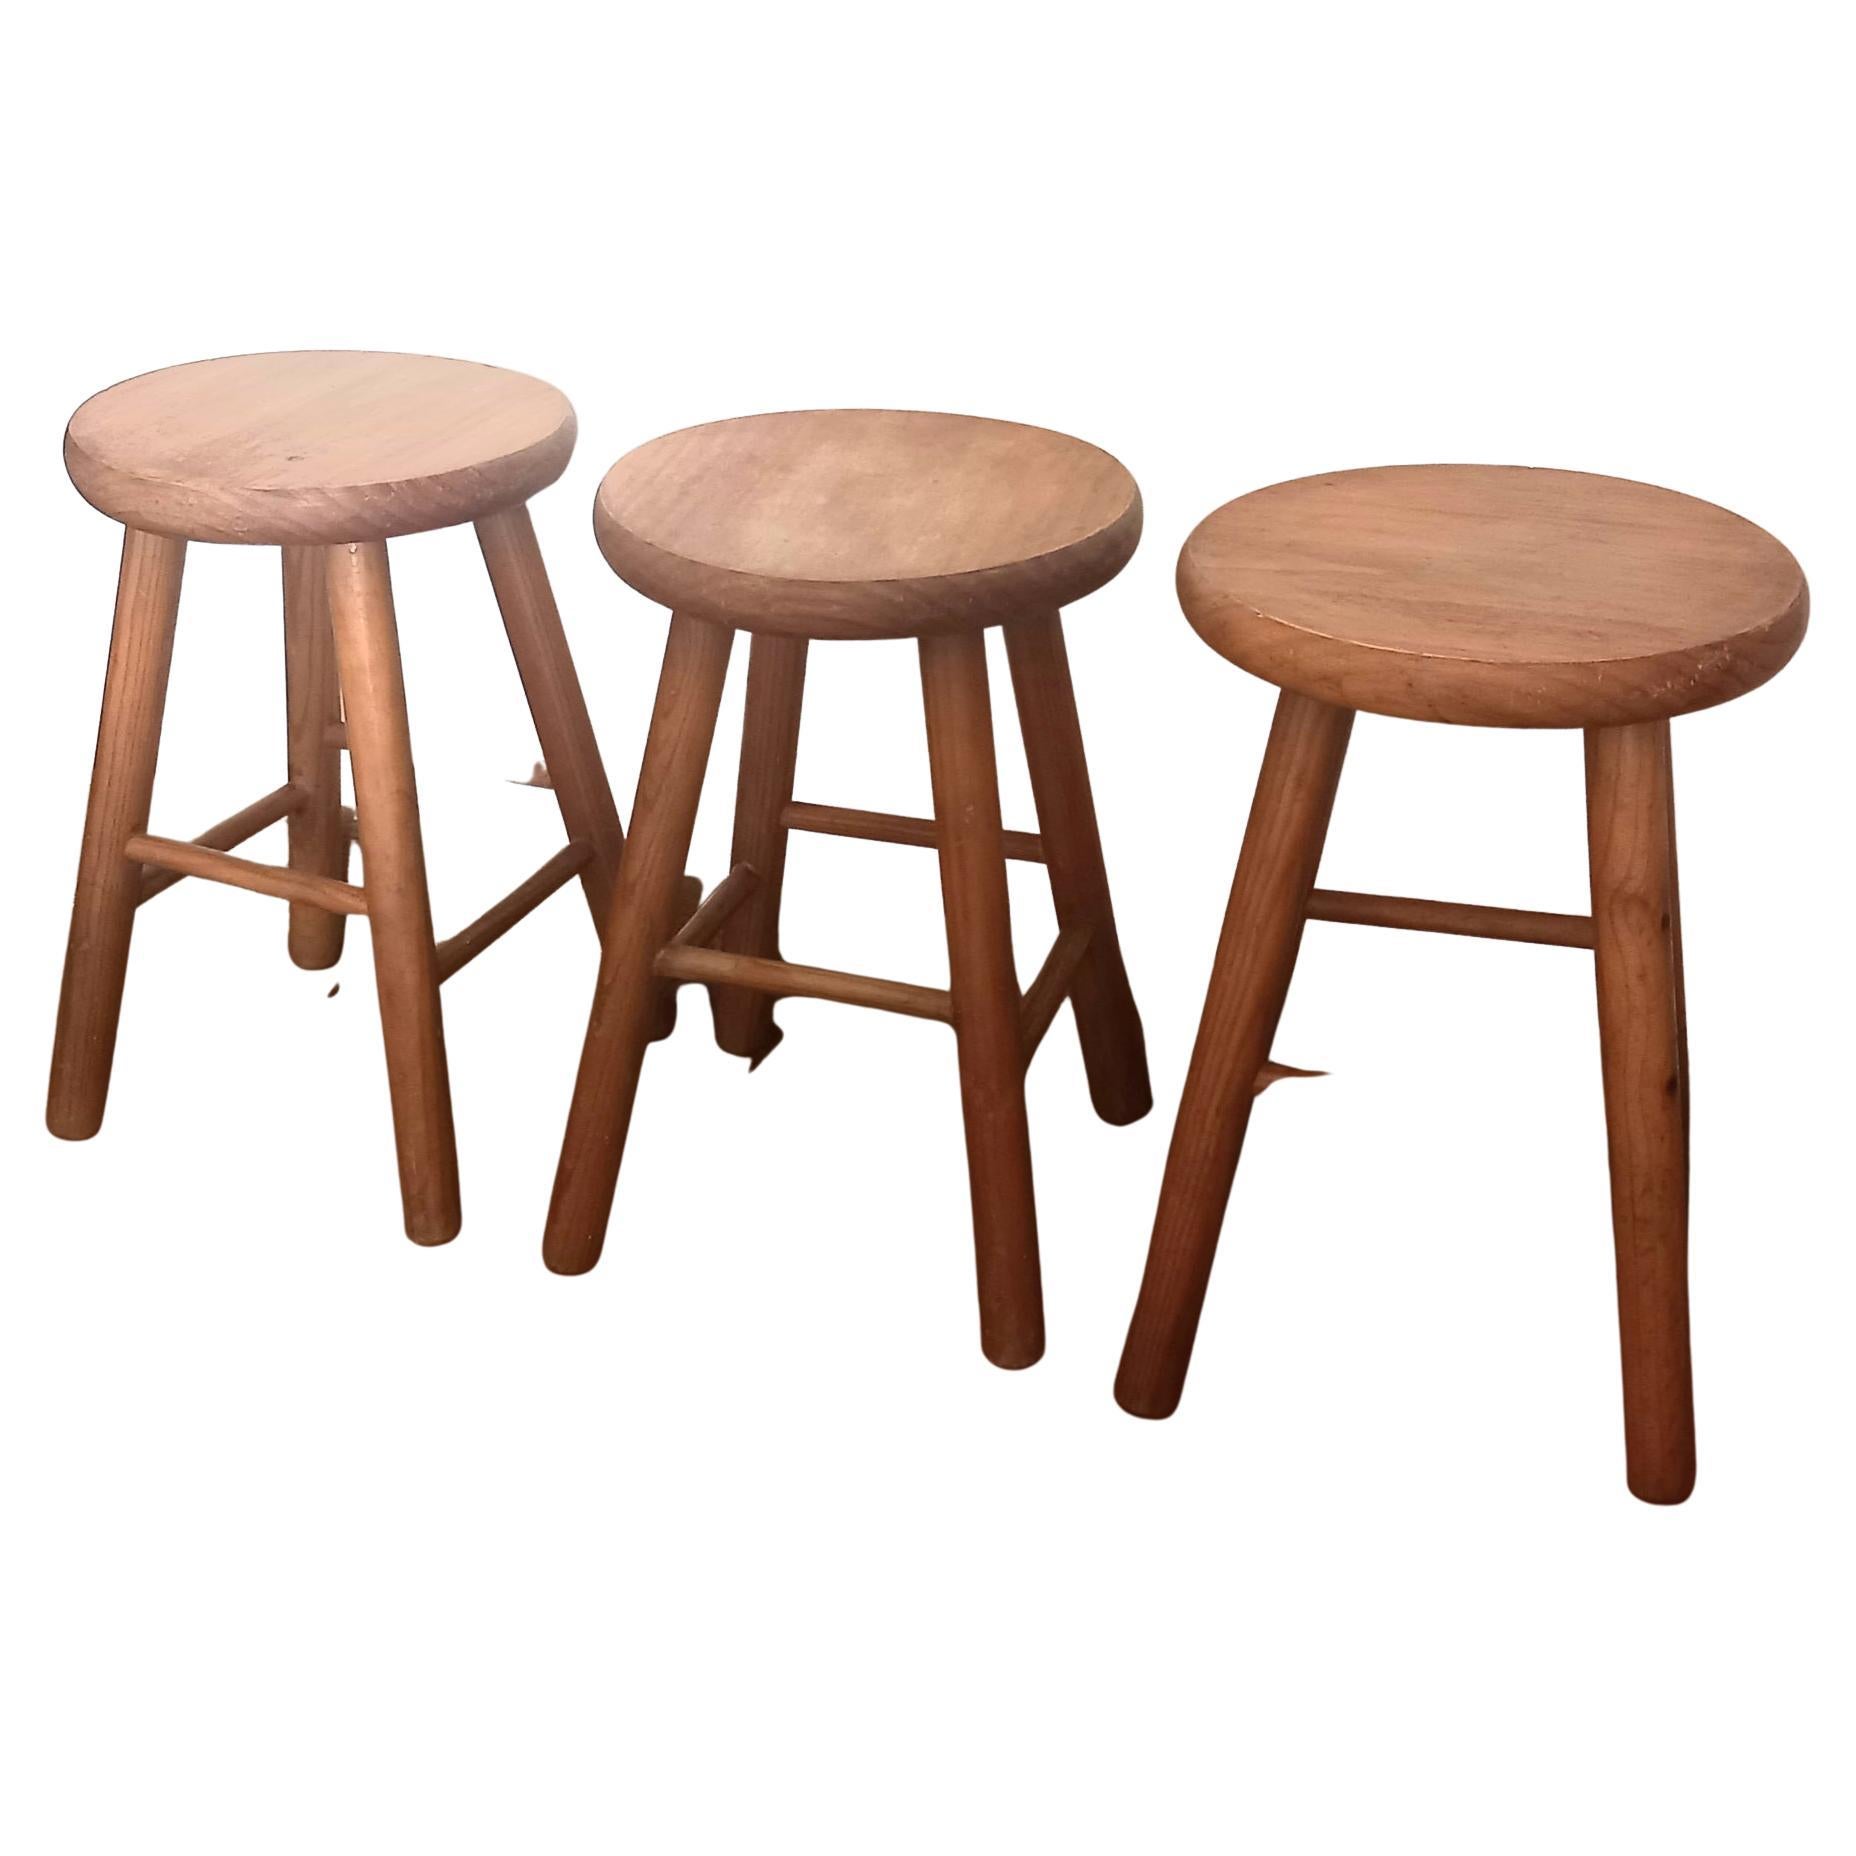 Wood stools from the Mid-20th Century in natural wood

Perfect stools for indoors or outdoors

Very solid and ergonomic shape.

There are 3 and they are sold individually

They are perfect as a complement to your terrace or living room. As they are